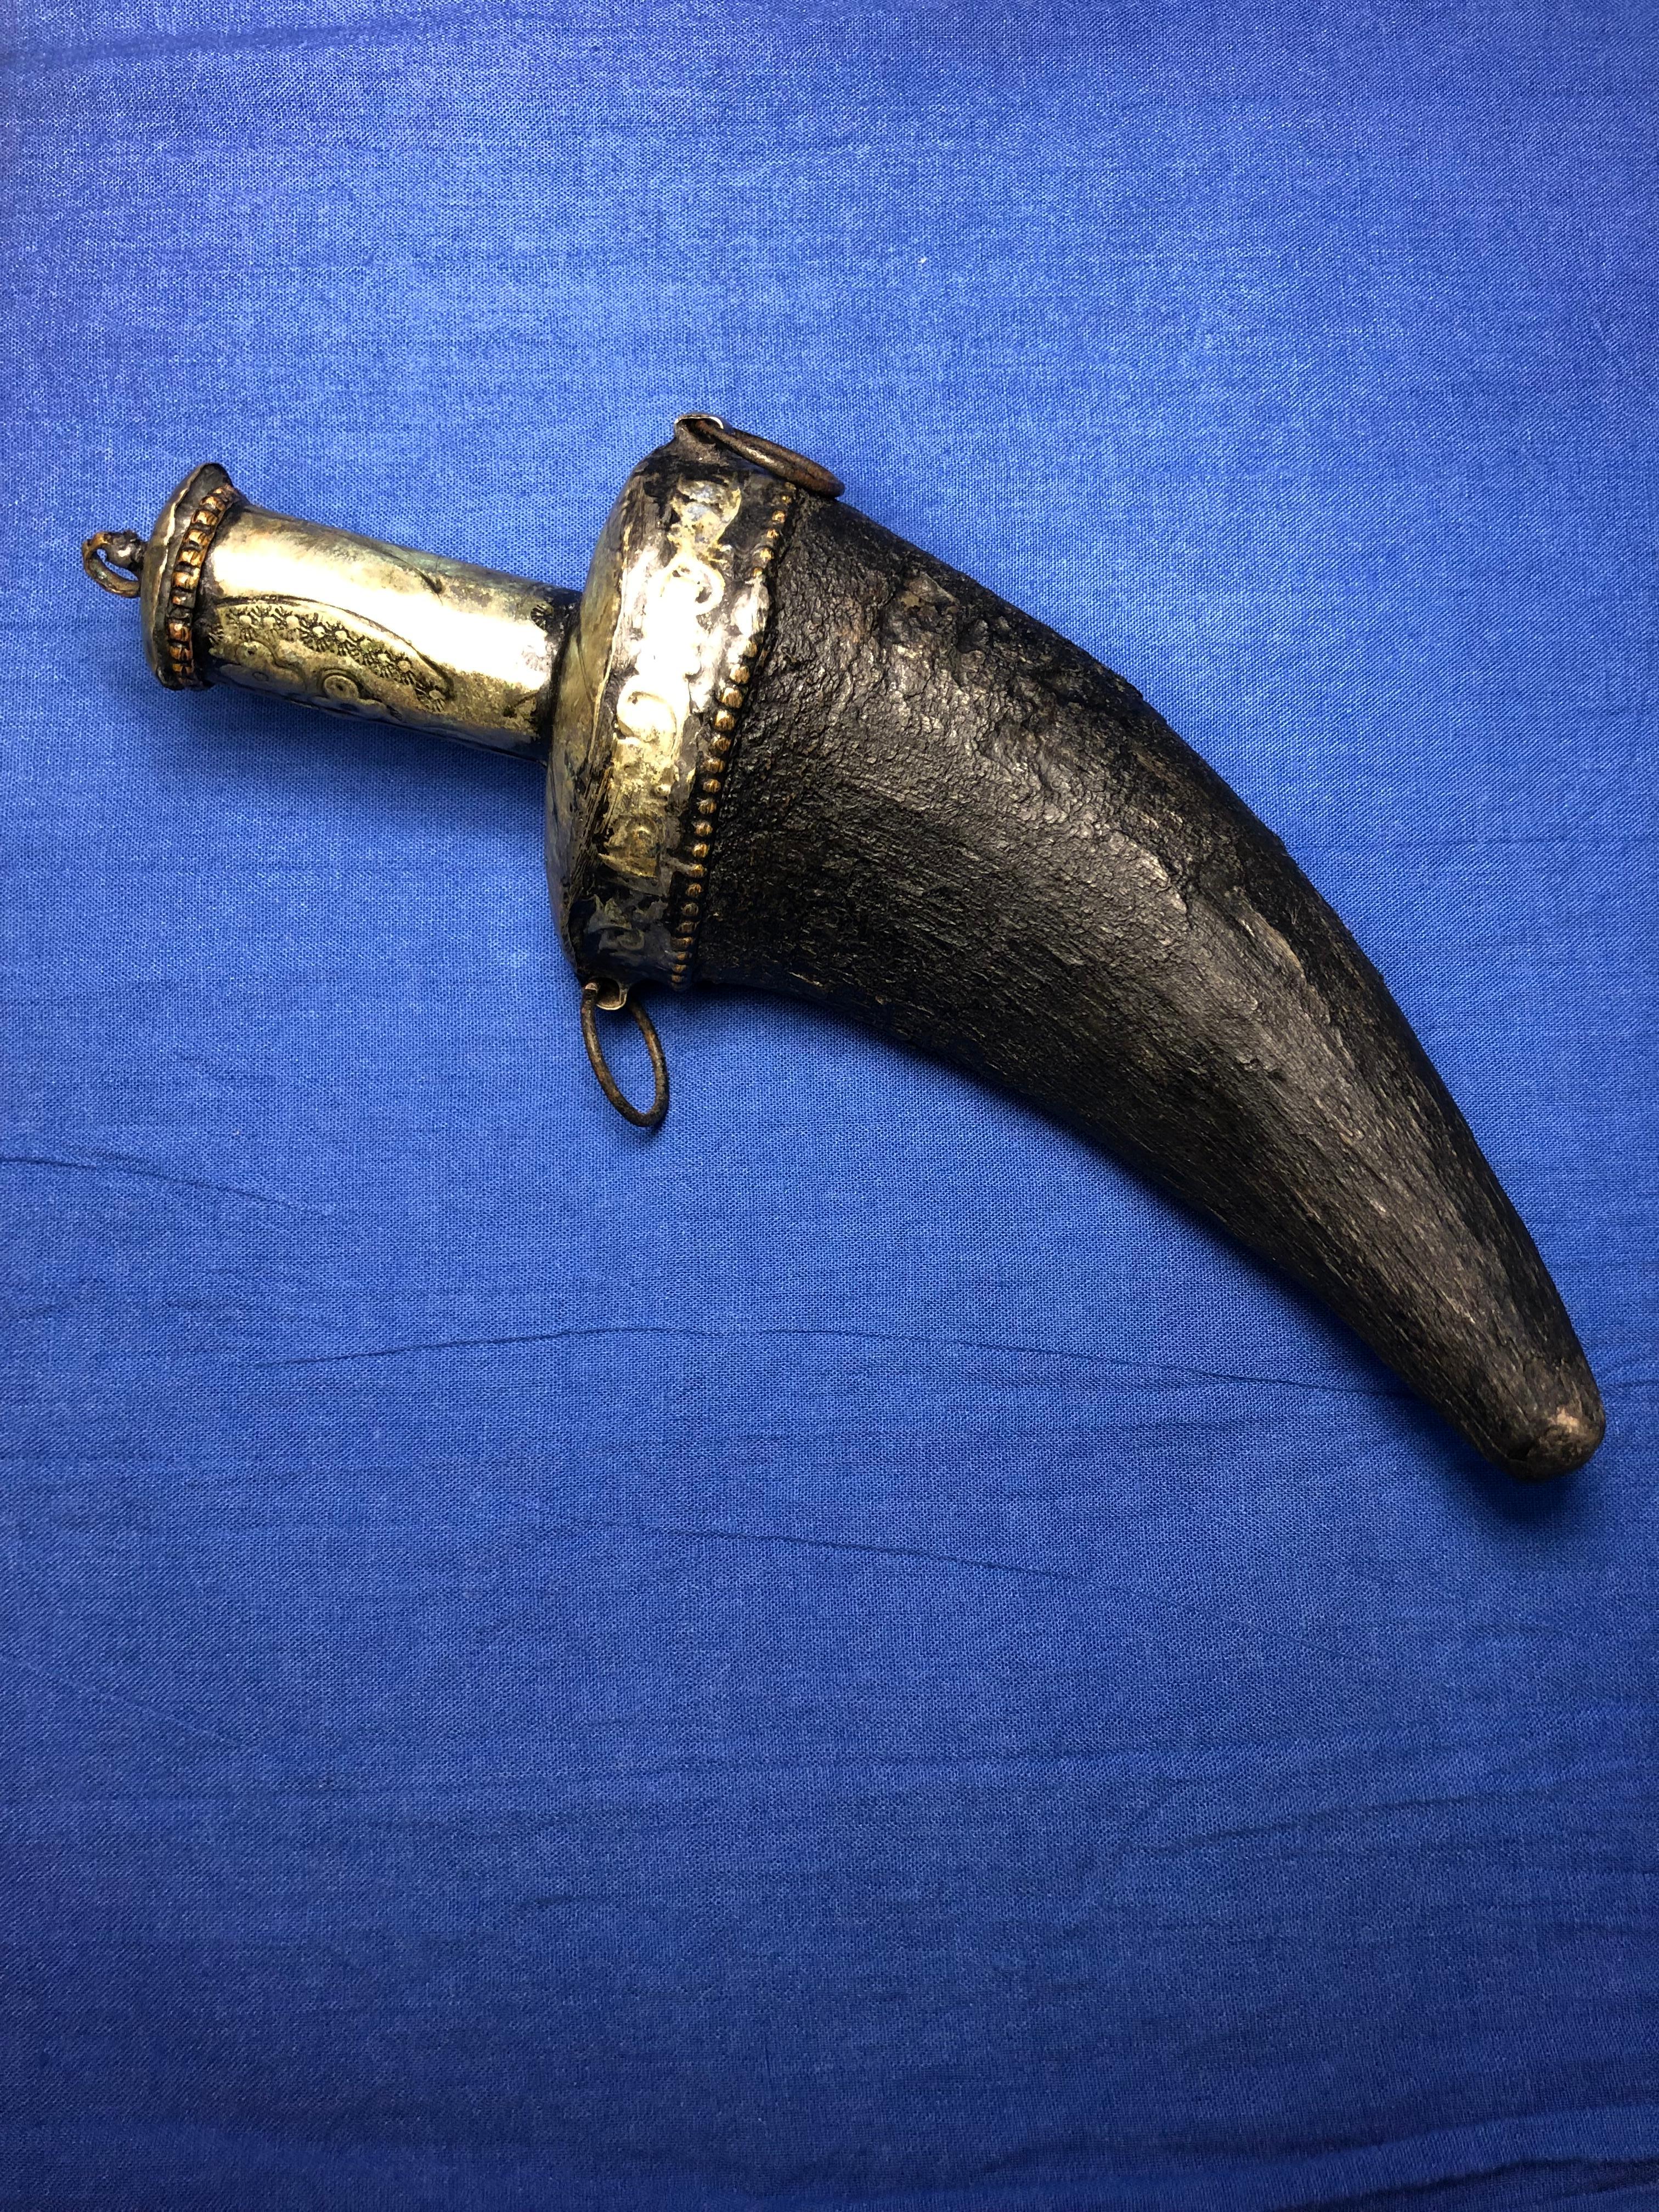 More than 100 years old, this hollowed-out gazelle Horn was not used for gunpowder as one might think, but instead for kohl powder. Sourced from Zagora, Morocco at the start of the Sahara desert, women would use kohl both to enhance their beauty as